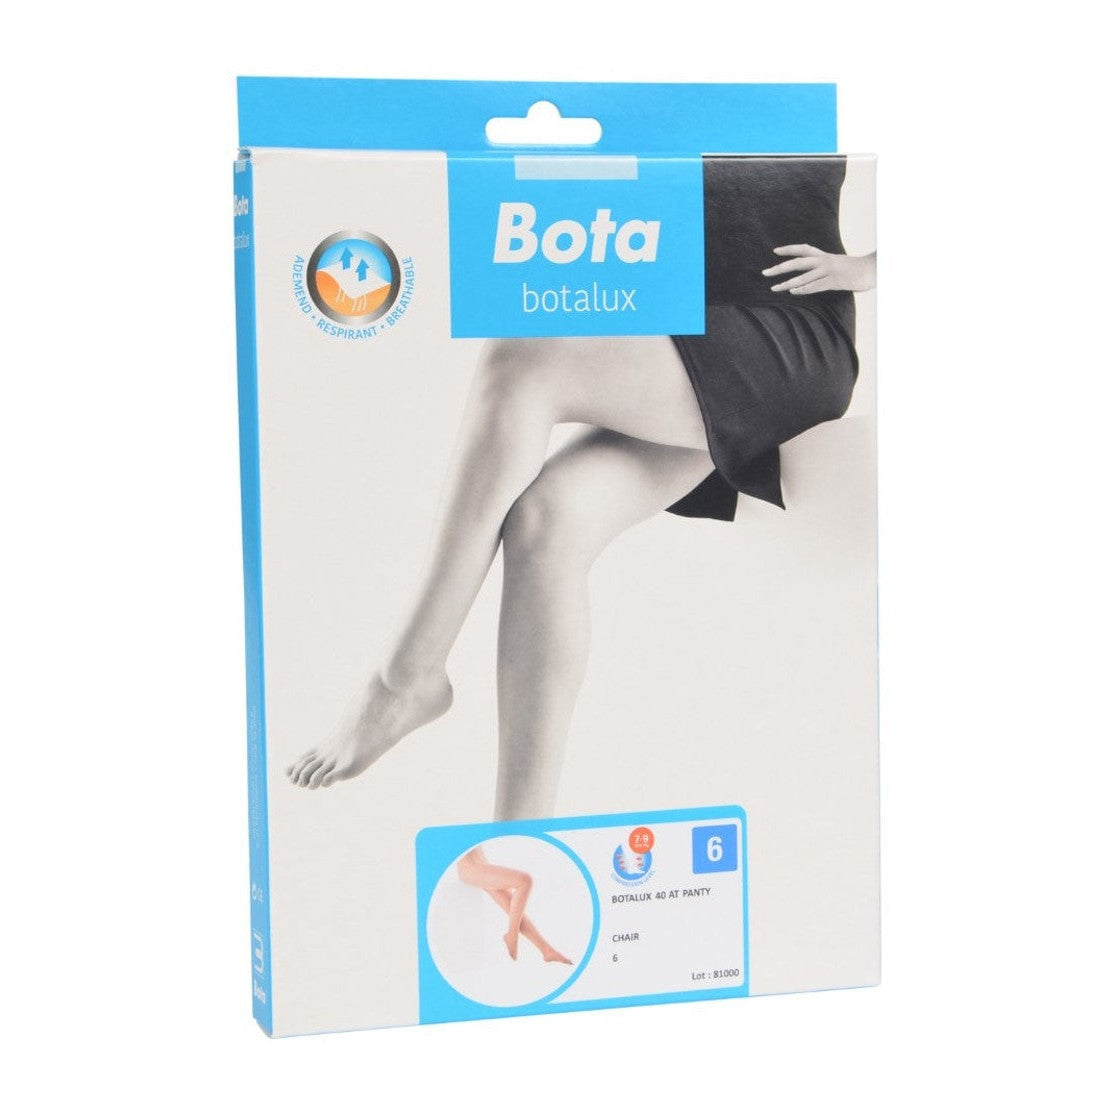 Botalux 40 support tights at ch skin color